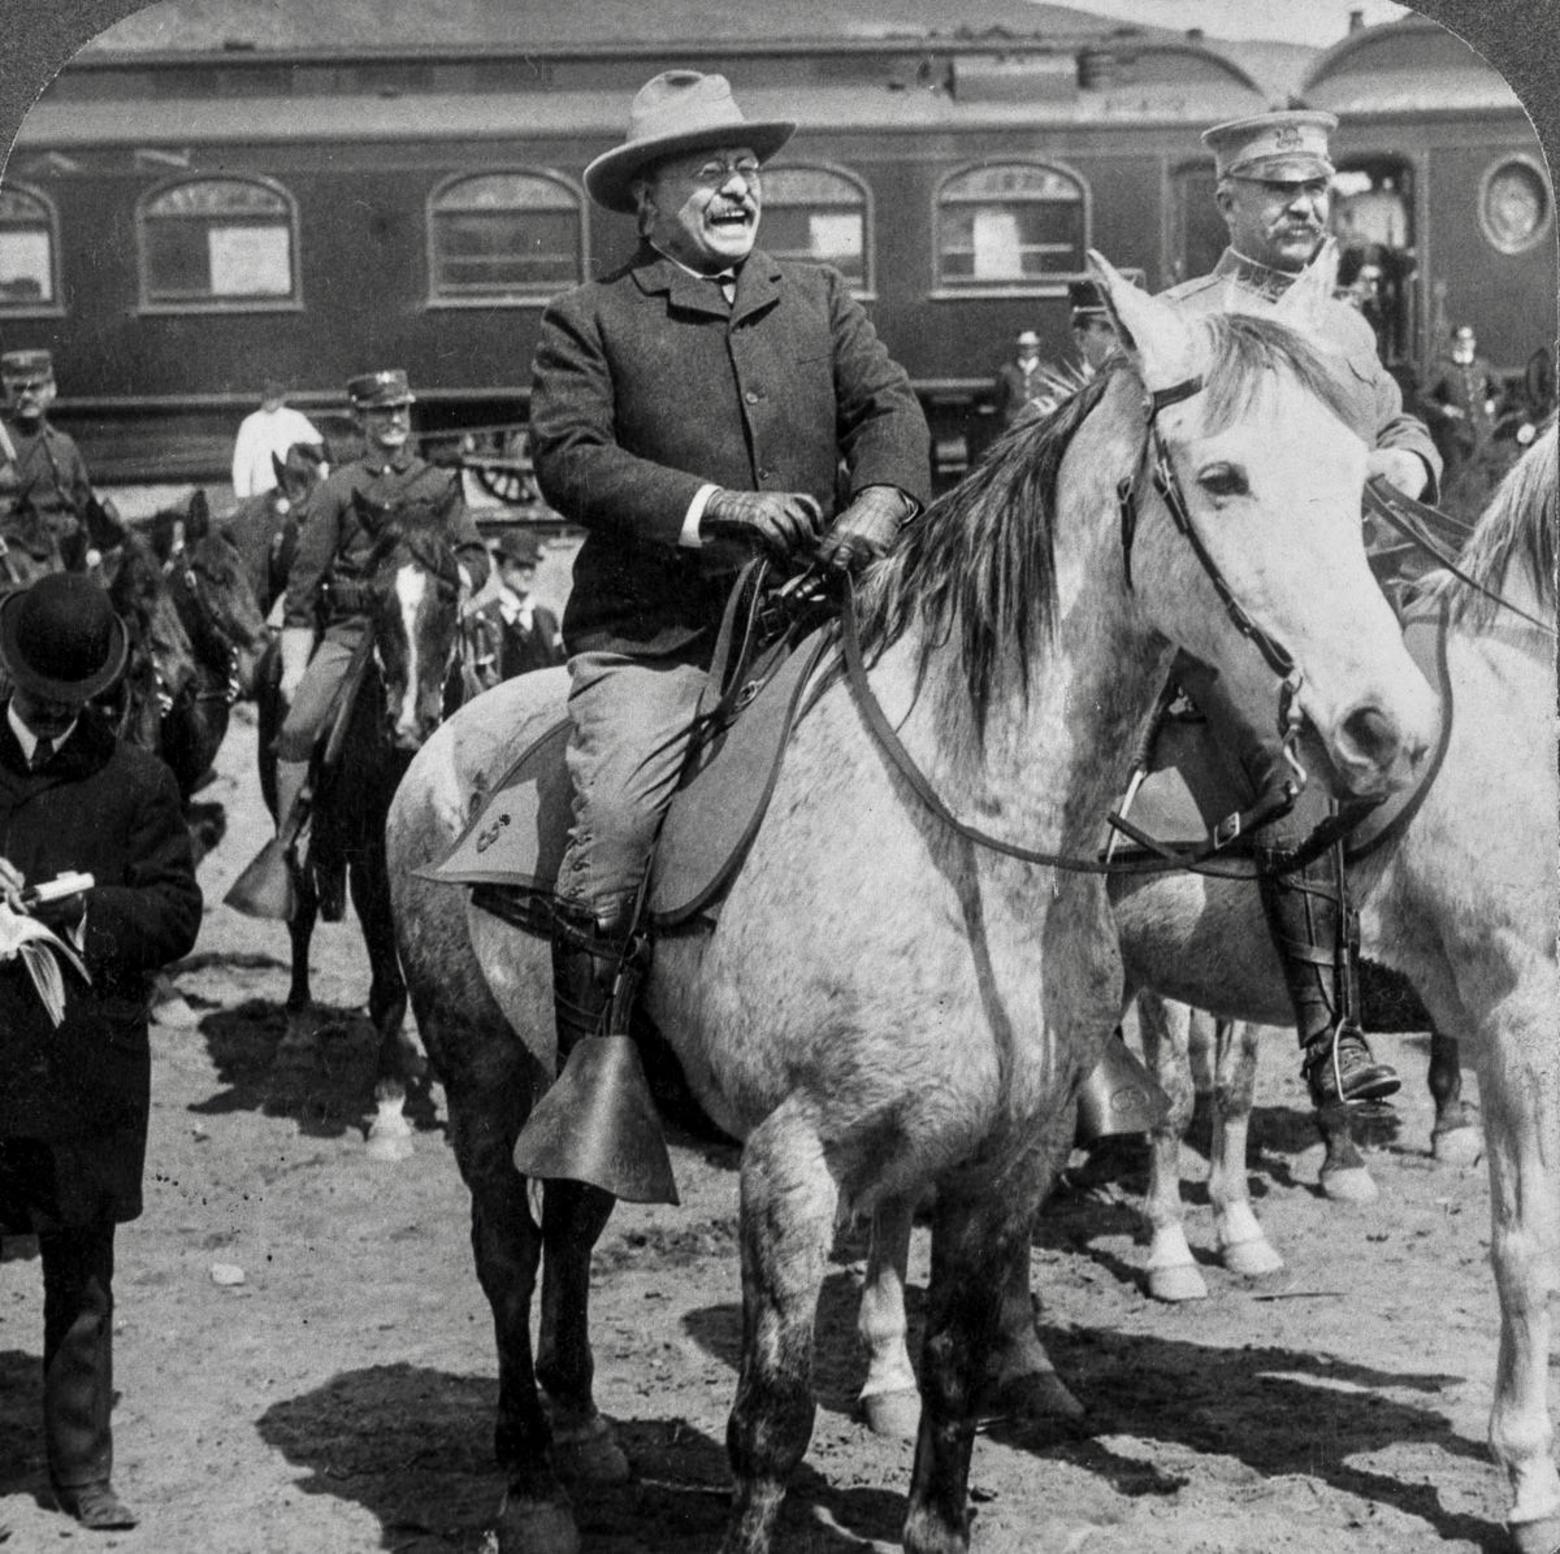 Upon arriving at Yellowstone's northern entrance in 1903, Roosevelt insisted upon riding into the national park on horseback. Not long after he dedicated the Roosevelt Arch and in the same year he visited the Grand Canyon and Yosemite where he famously had his photograph taken with John Muir. Based on ignominous things they wrote and said, Roosevelt and Muir have been called out and condemned as racist. Photo courtesy Library of Congress